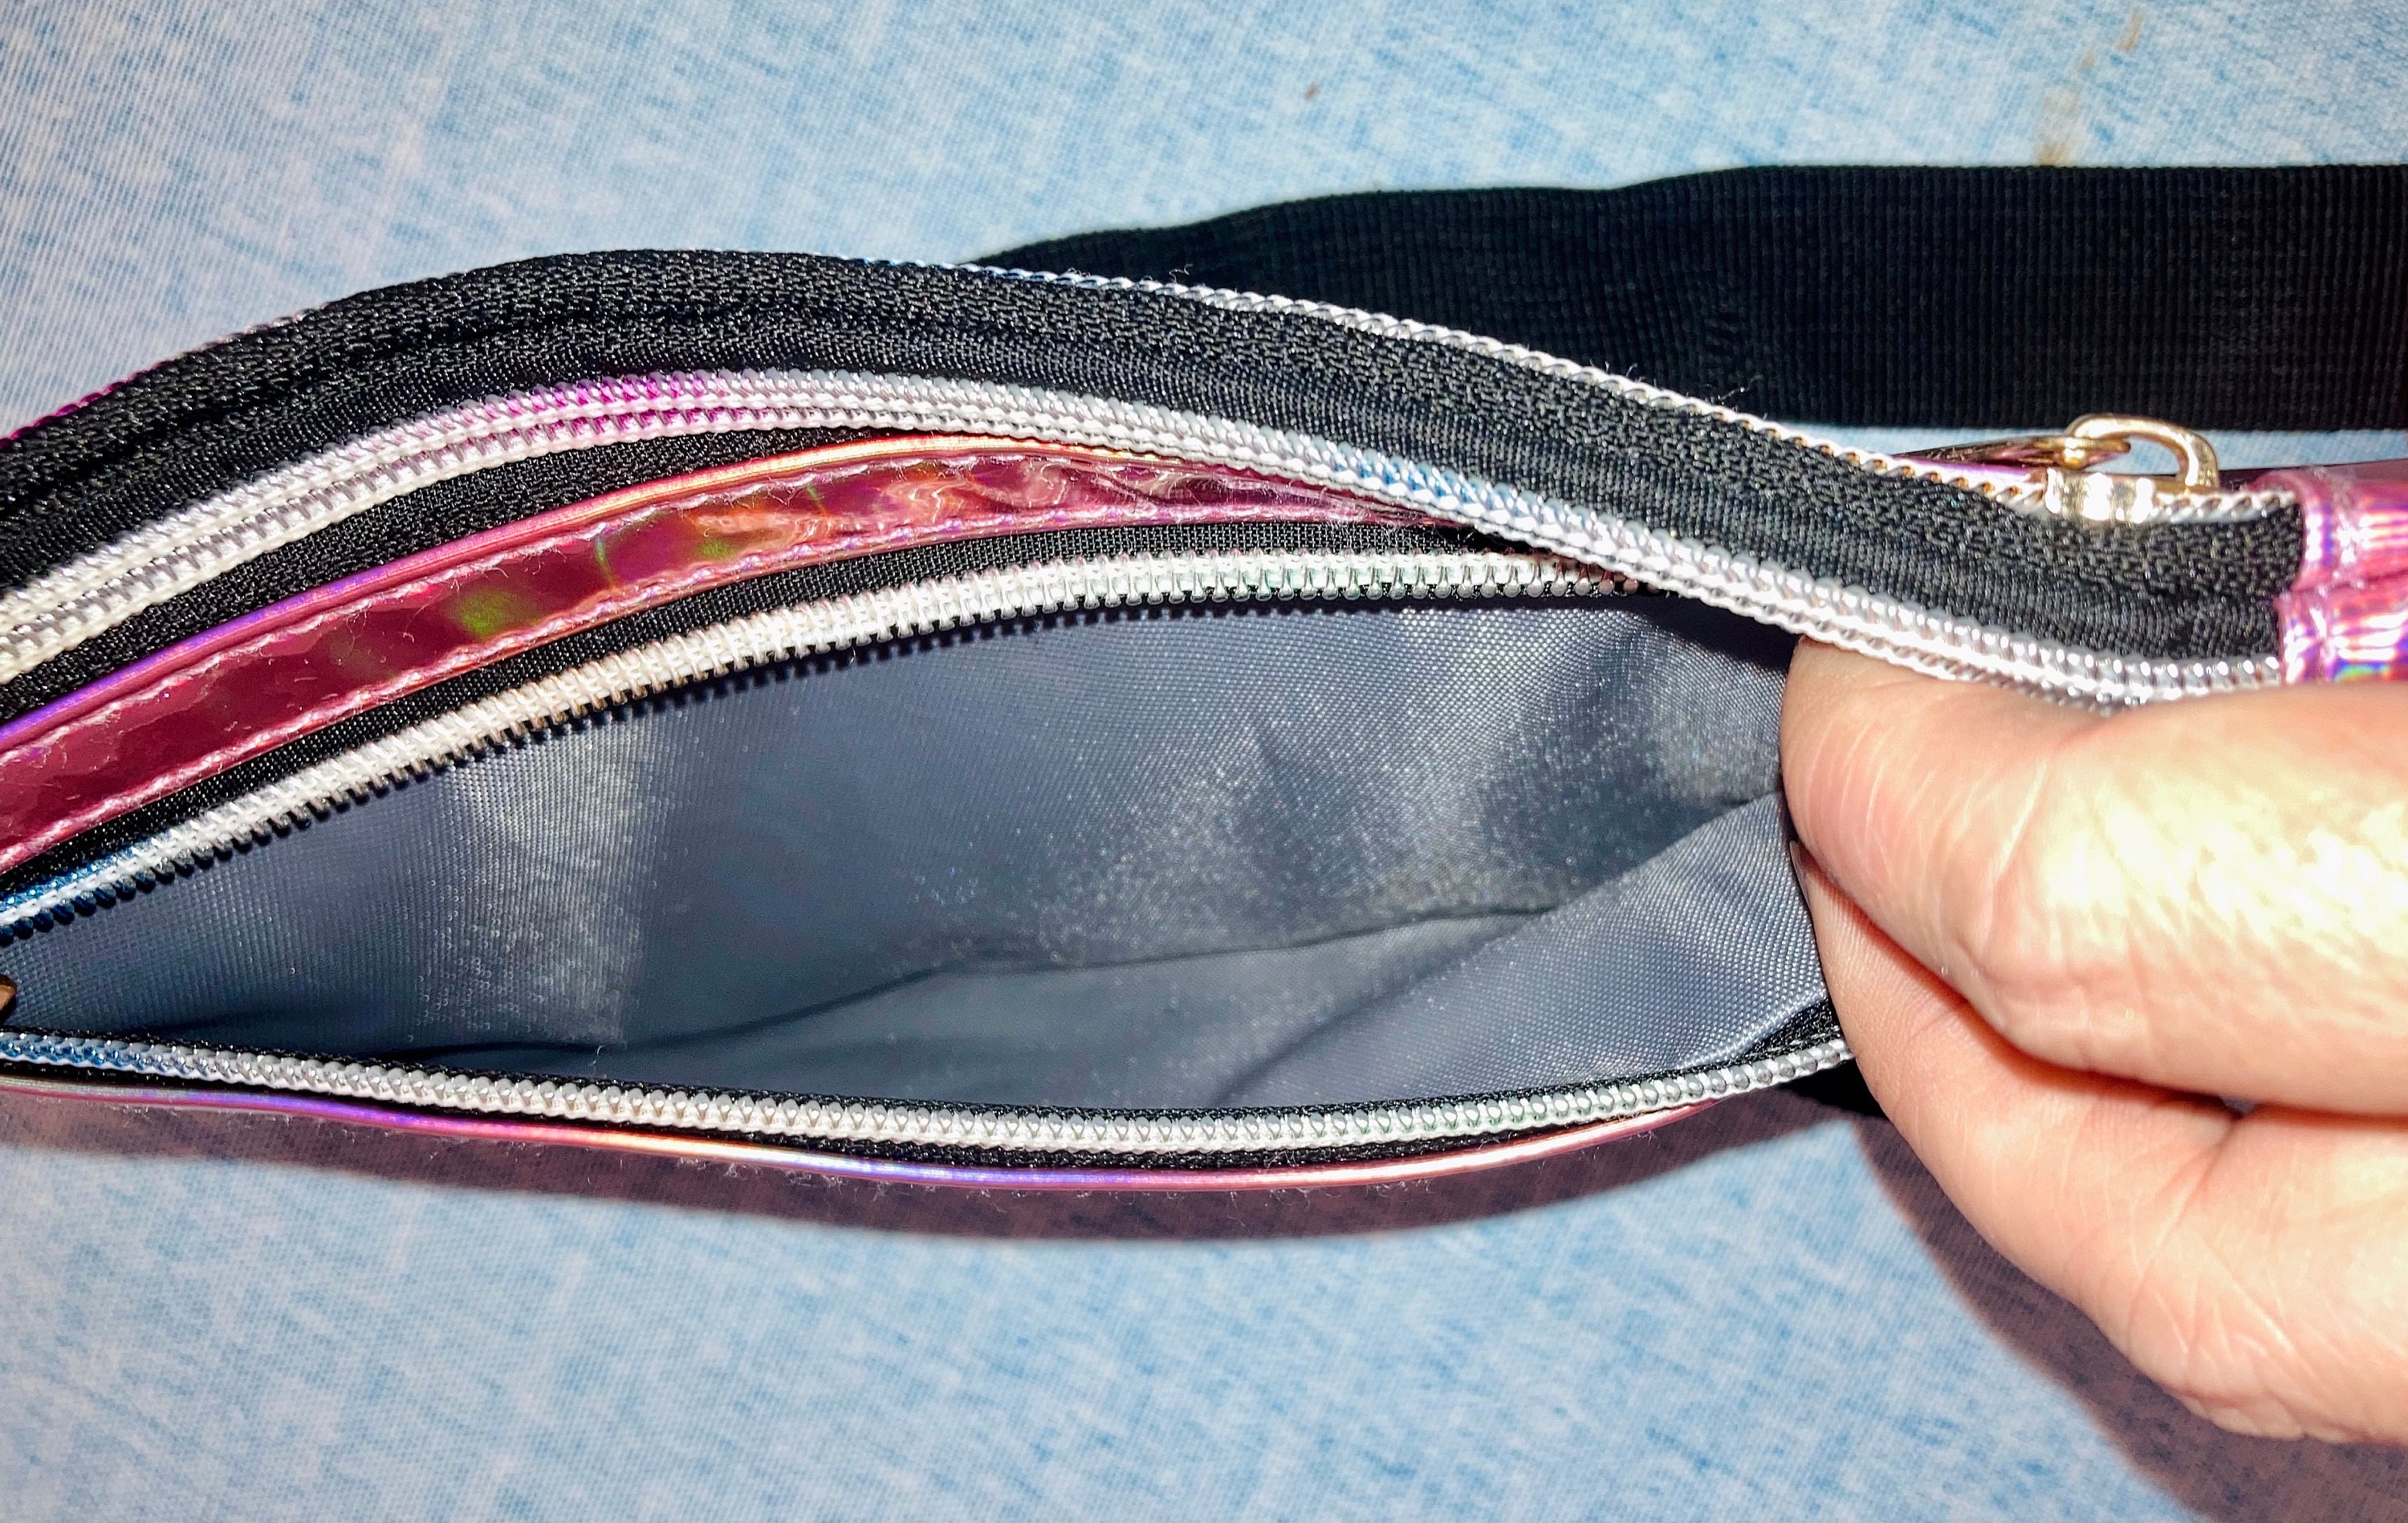 Get Your Groove Arn Fanny Pack Iridescent Pink With Rainbow - Etsy